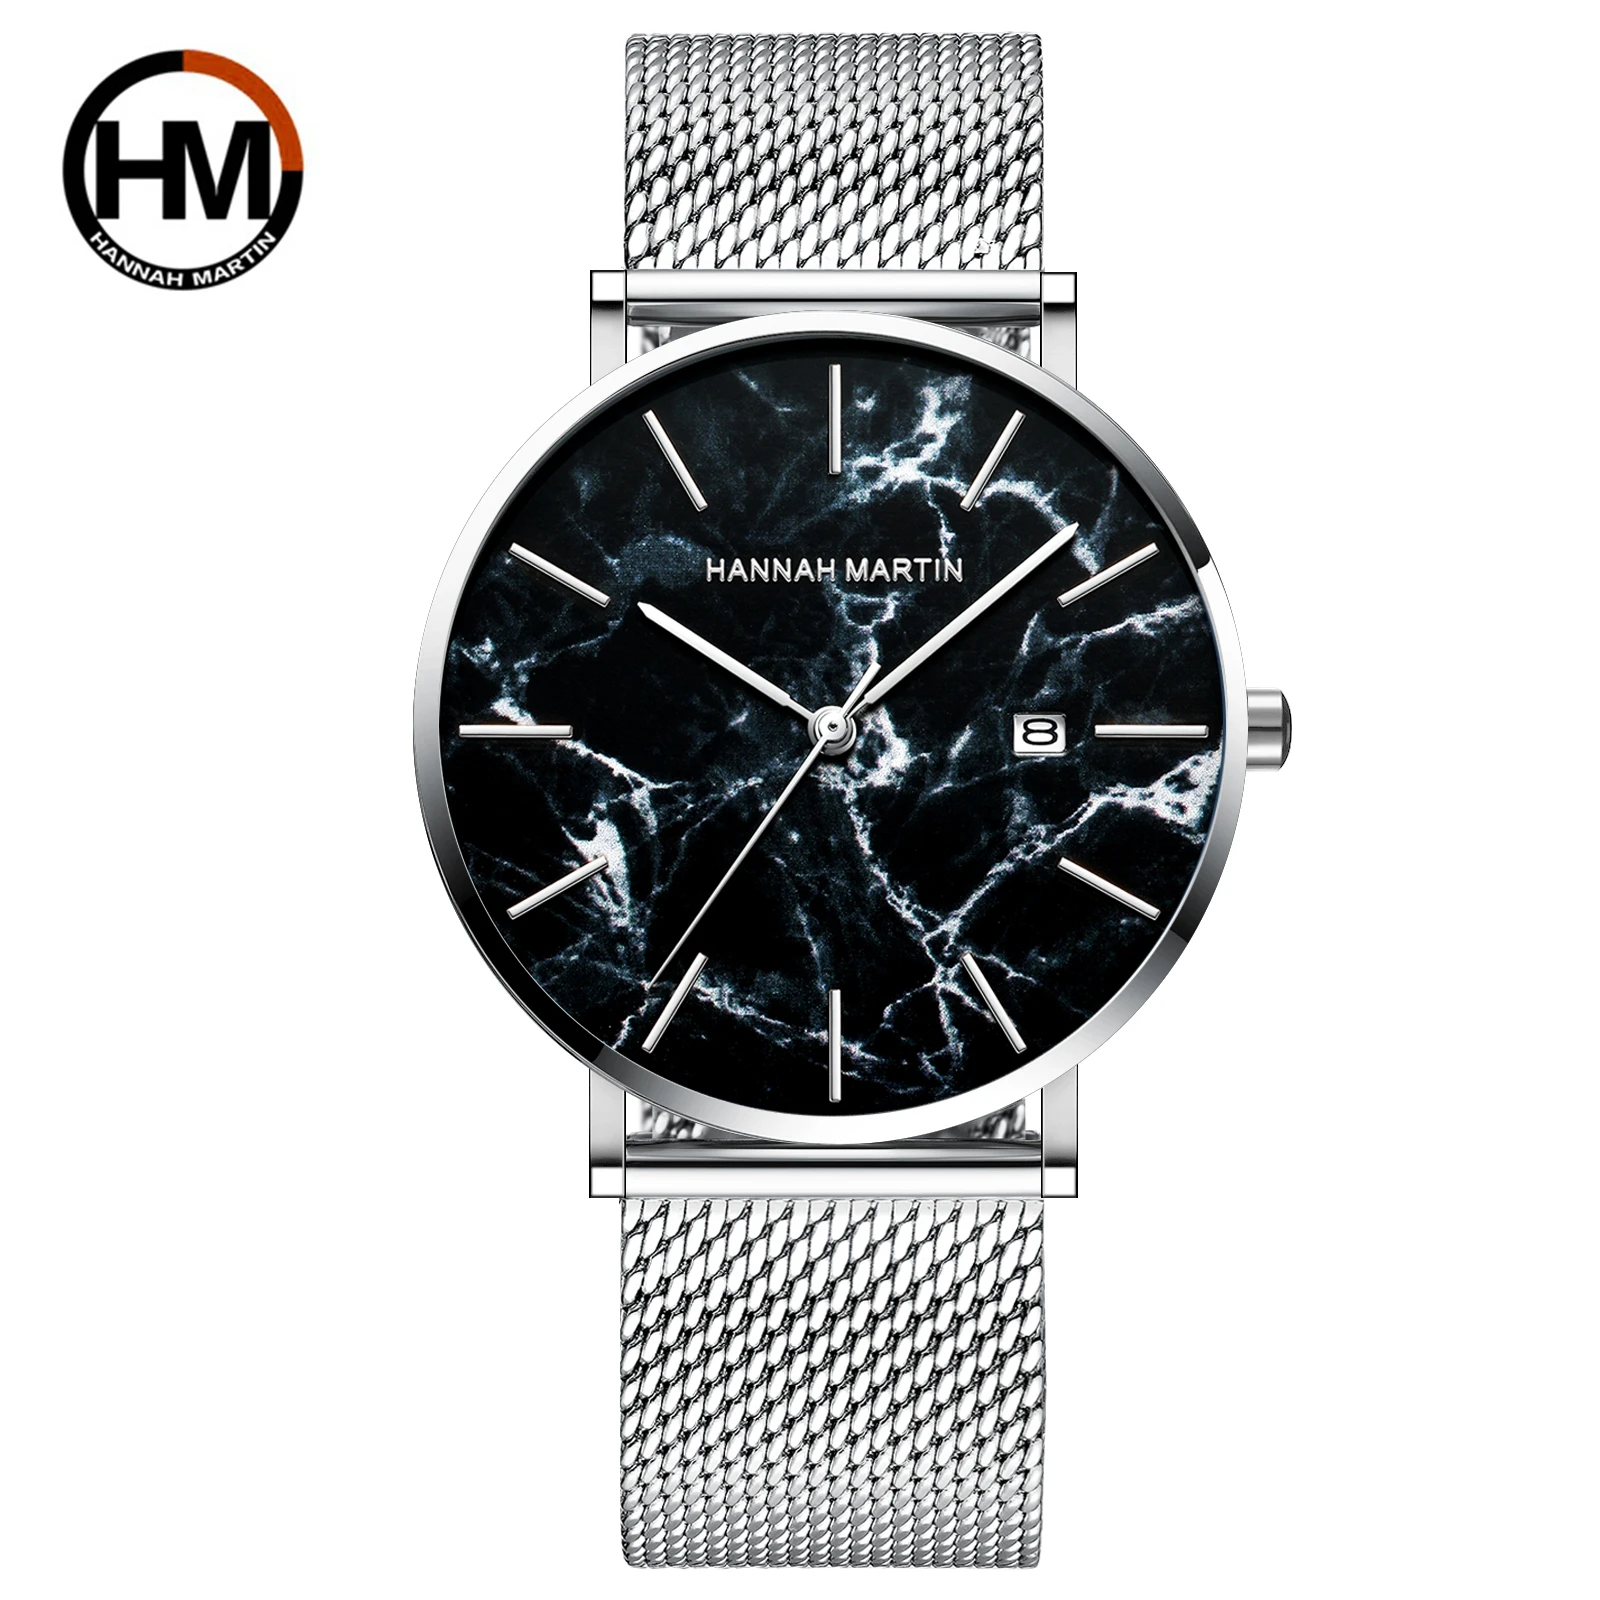 

Tough Guy Style Calendar Luxurious High Quality Multifunctional 3ATM Waterproof Elite For Men's Wild Stainless Steel Wrist Watch